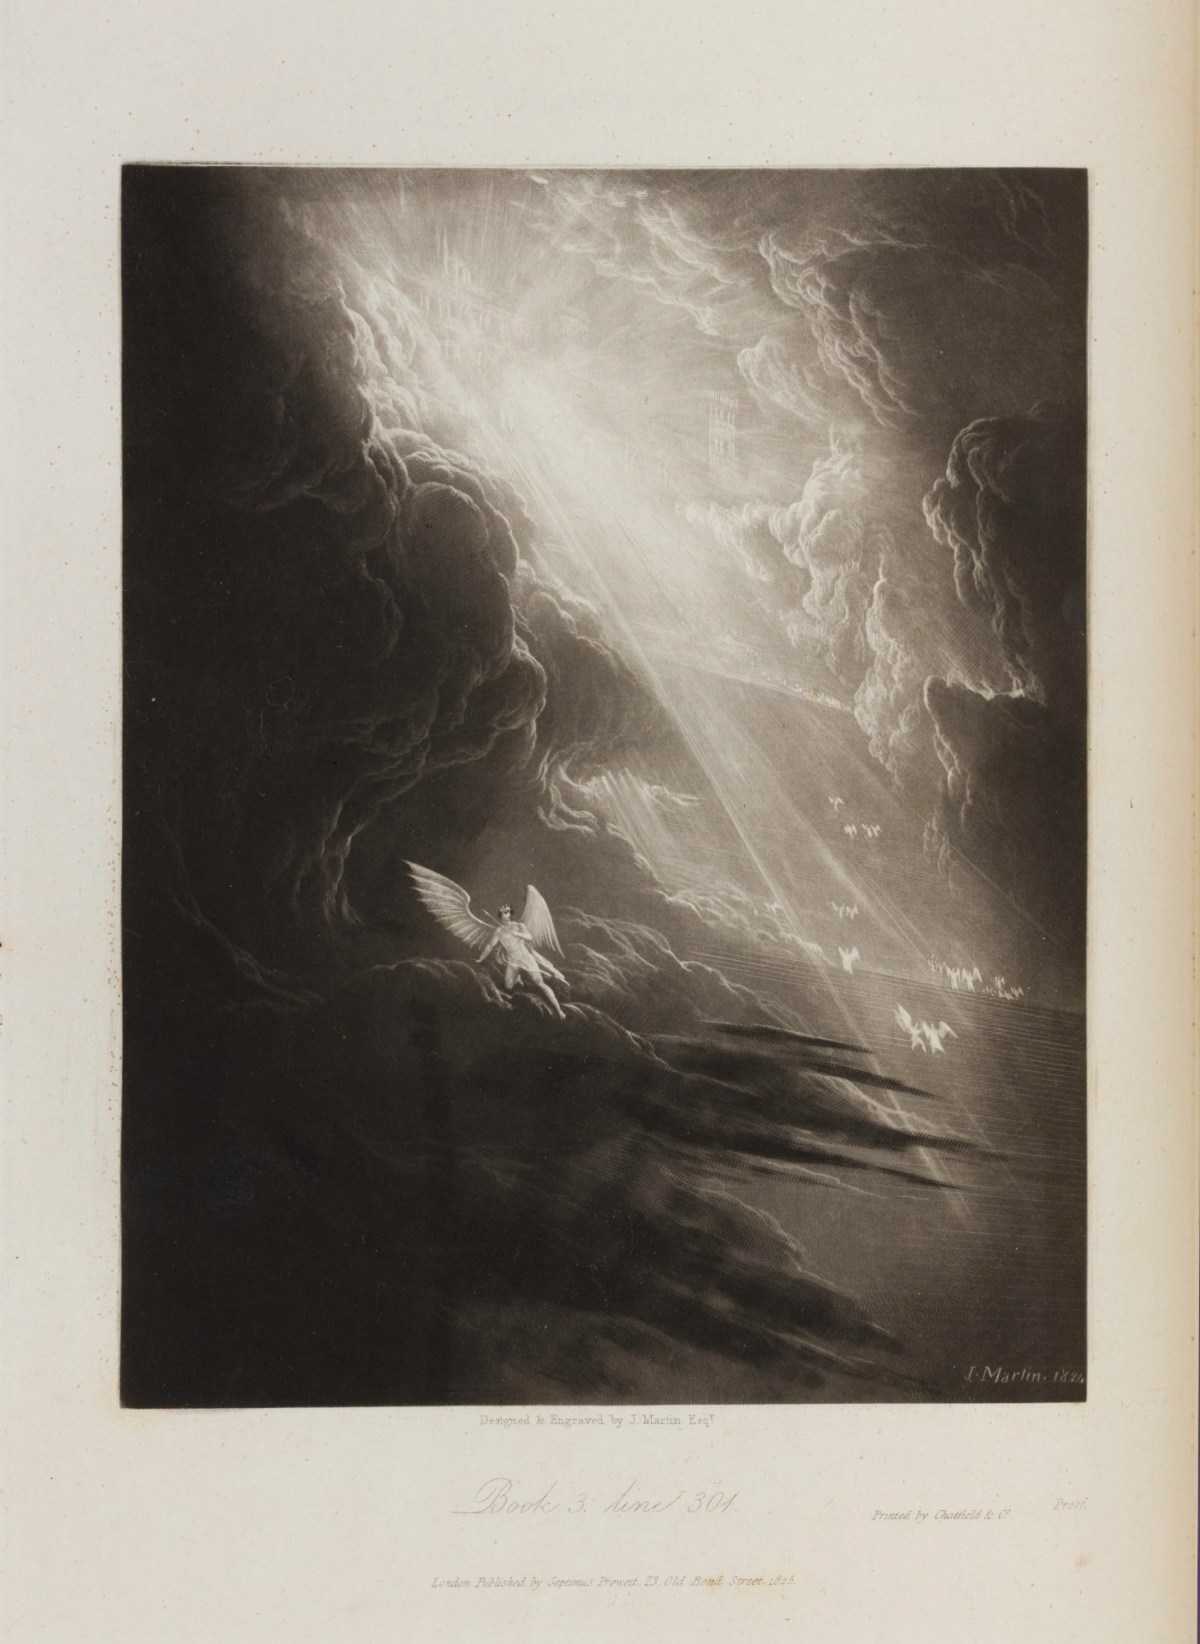 Satan viewing the ascent to Heaven | Works of Art | RA Collection ...